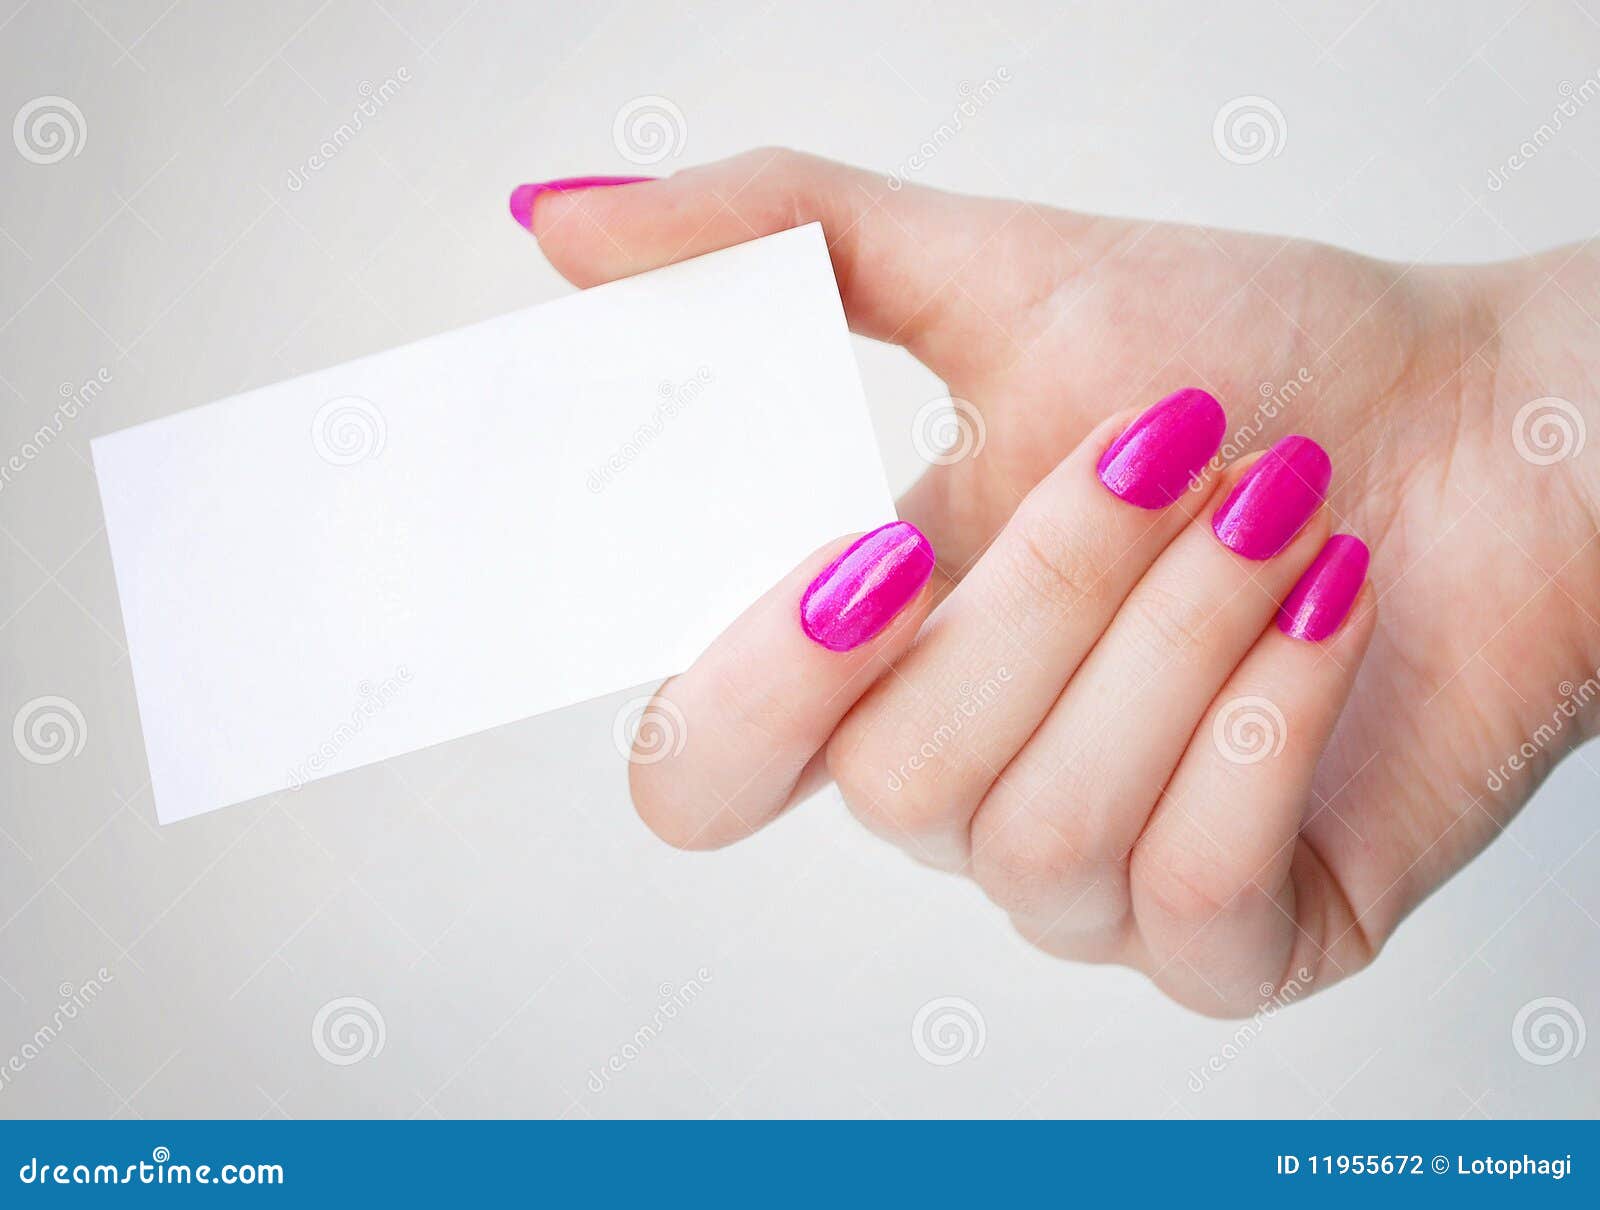 Blank Business Card stock photo. Image of brunette, hands - 11955672